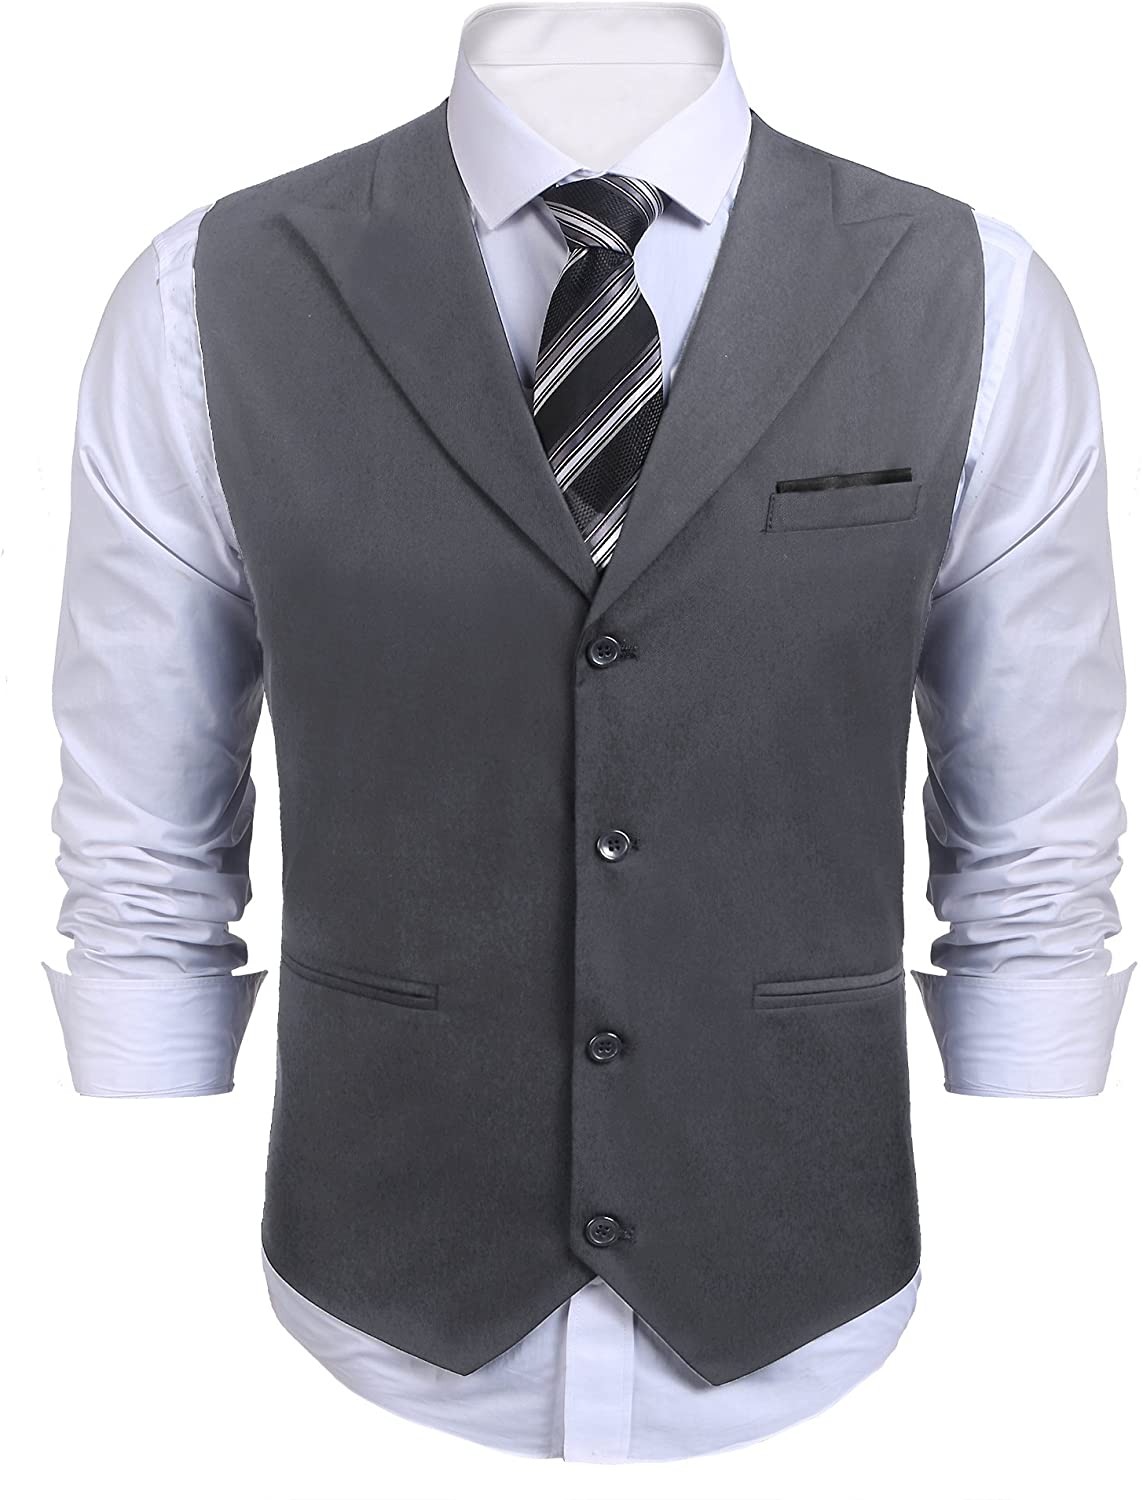 Double Breasted Vest with 5 Buttons Gilet Business Casual Classic Basic Men's Suit Vest for Men COOFANDY Men's Slim Fit Single Breasted